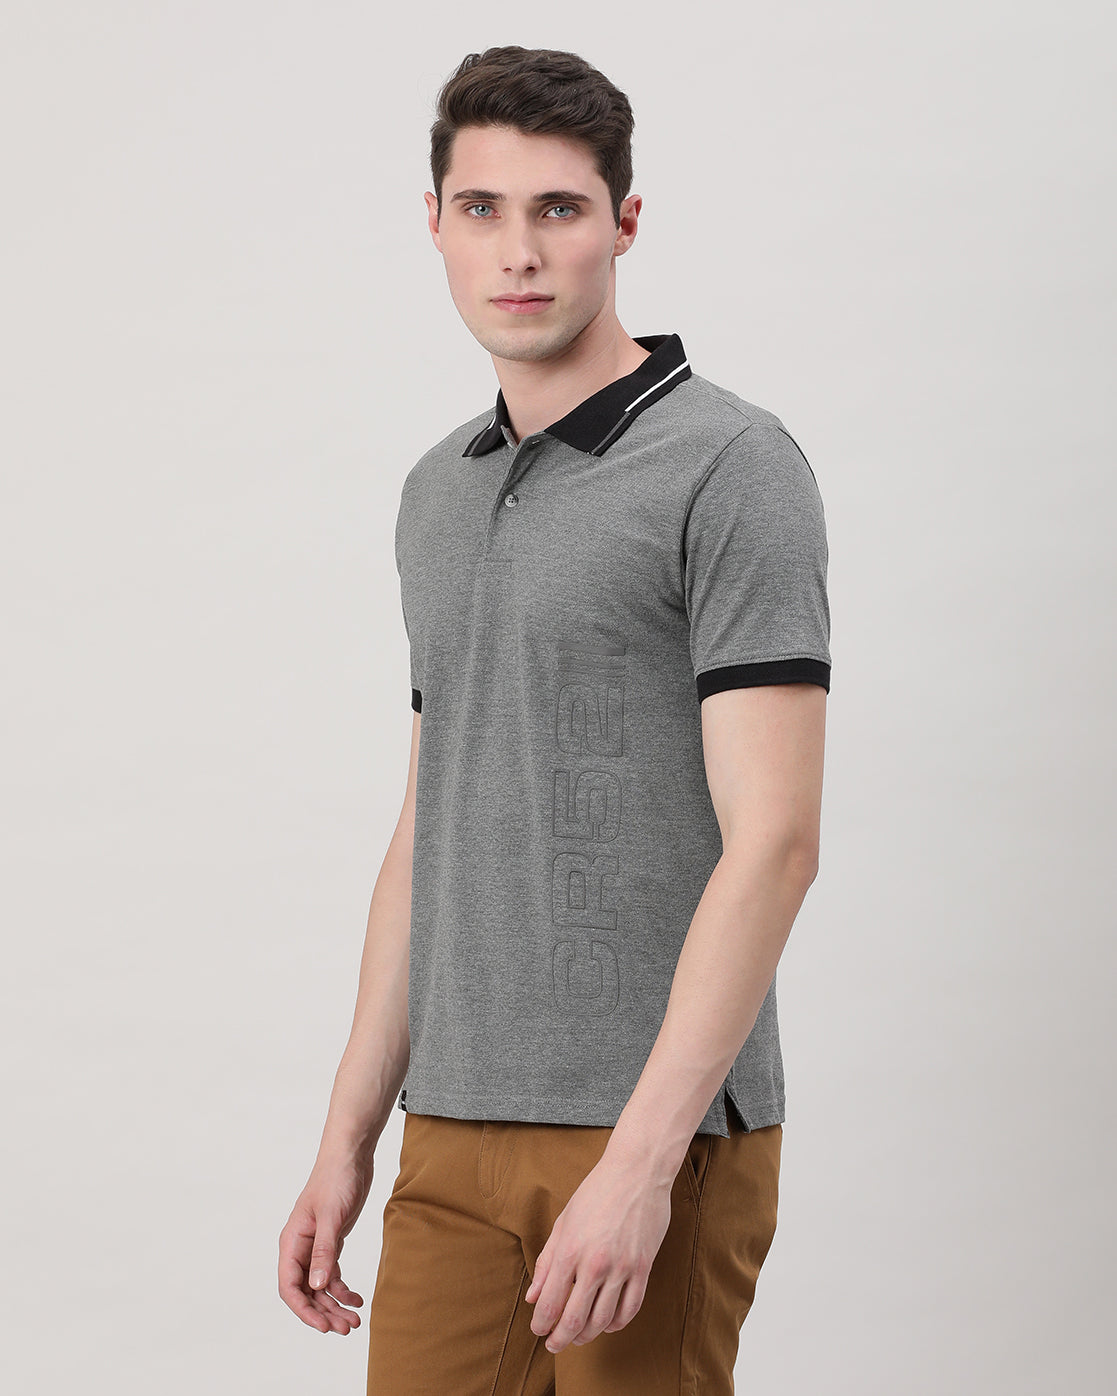 Casual T-Shirt Half Sleeve Slim Fit Solid Printed with Collar Dark Grey for Men